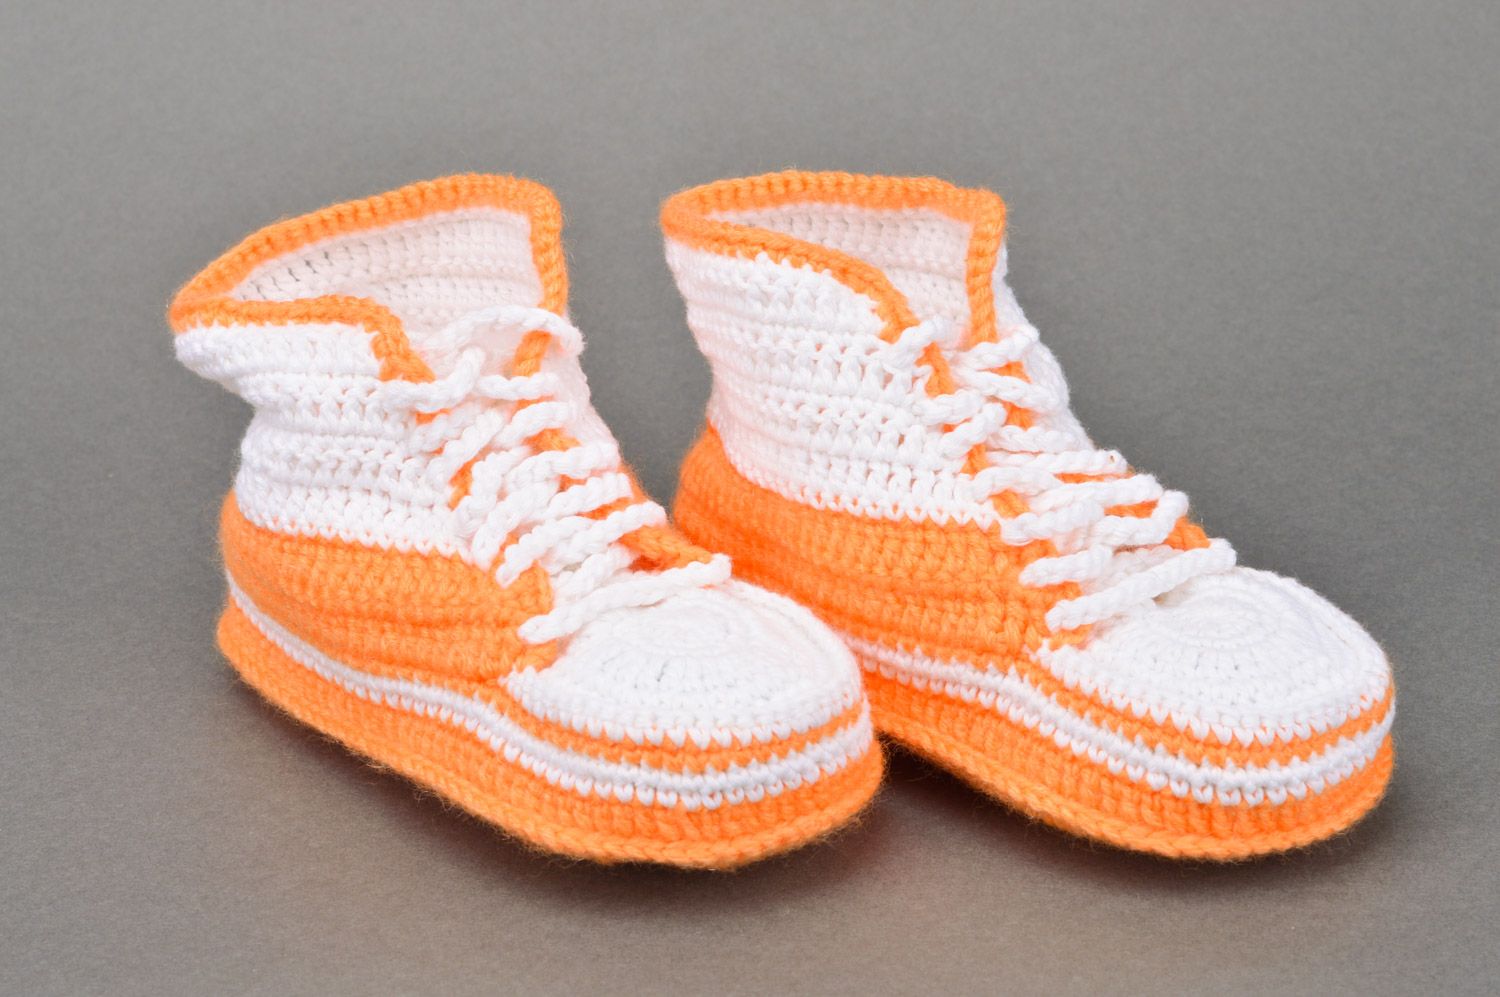 Handmade crocheted small orange and white baby shoes with shoelaces photo 2